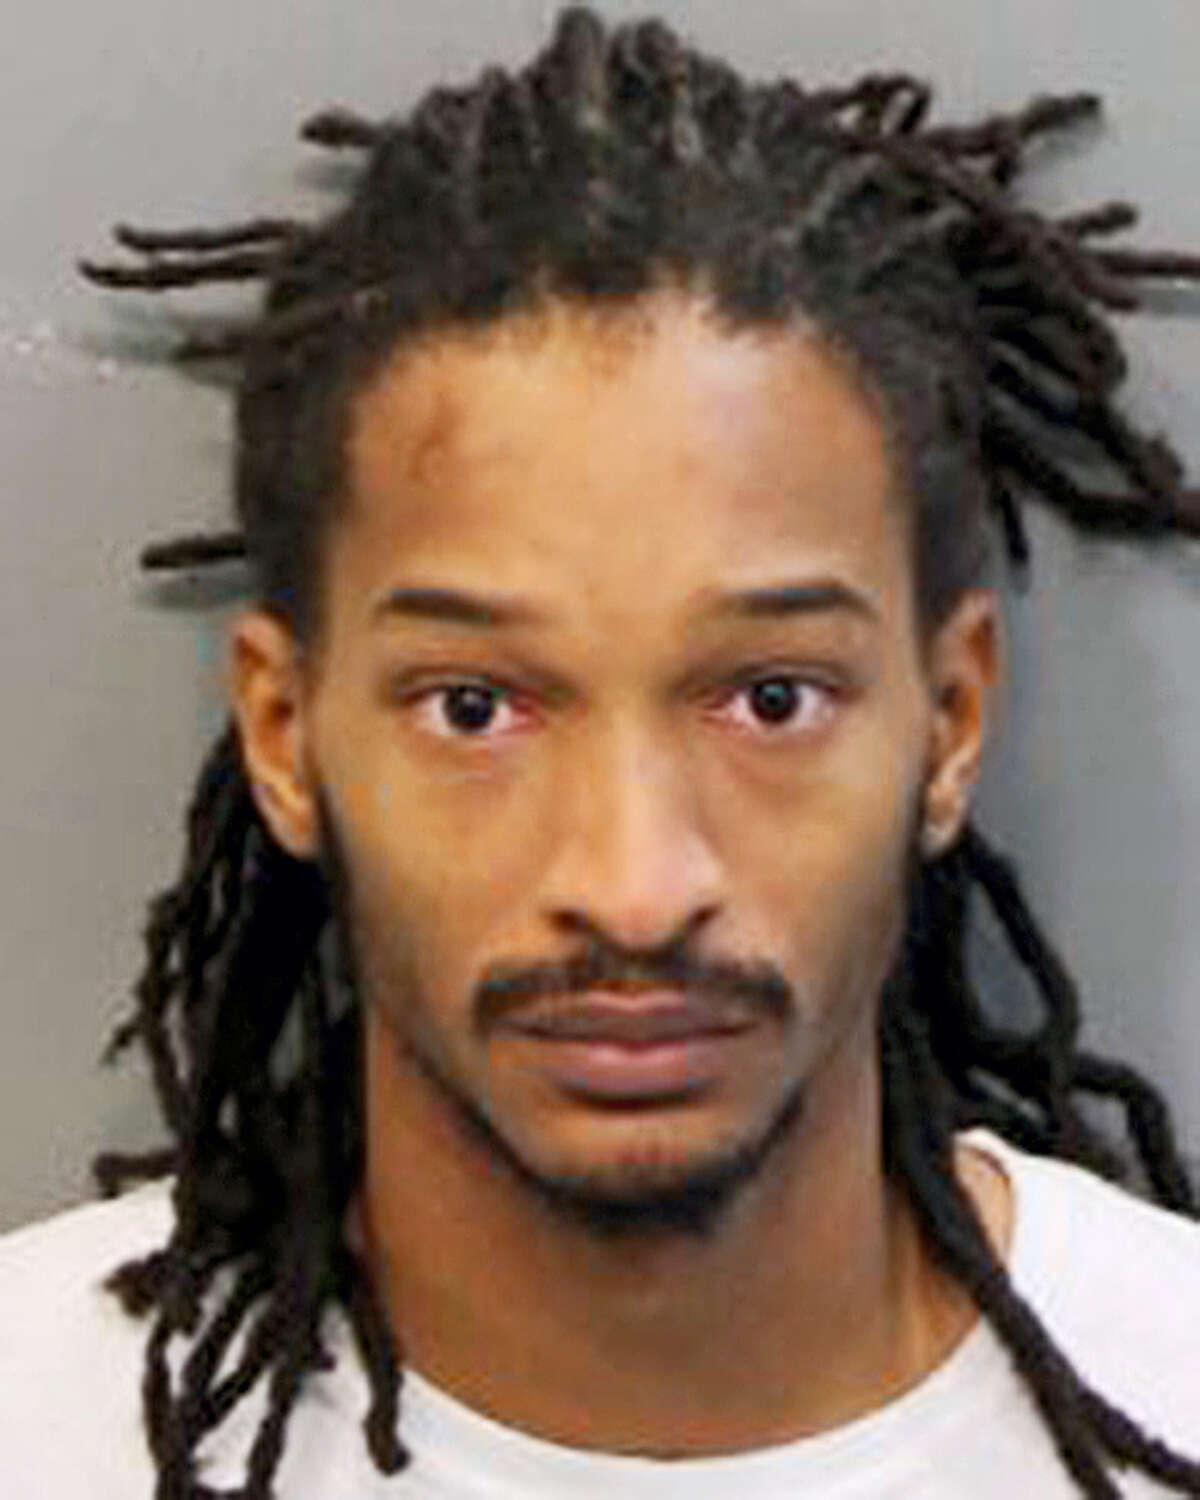 In this undated photo released by the Chattanooga Police Department, Johnthony Walker, 24, poses for a photo. Walker, the driver of a school bus that was filled with elementary students when it crashed, Monday, Nov. 21, 2016, in Chattanooga, killing at least five children, has been arrested and faces charges including vehicular homicide.